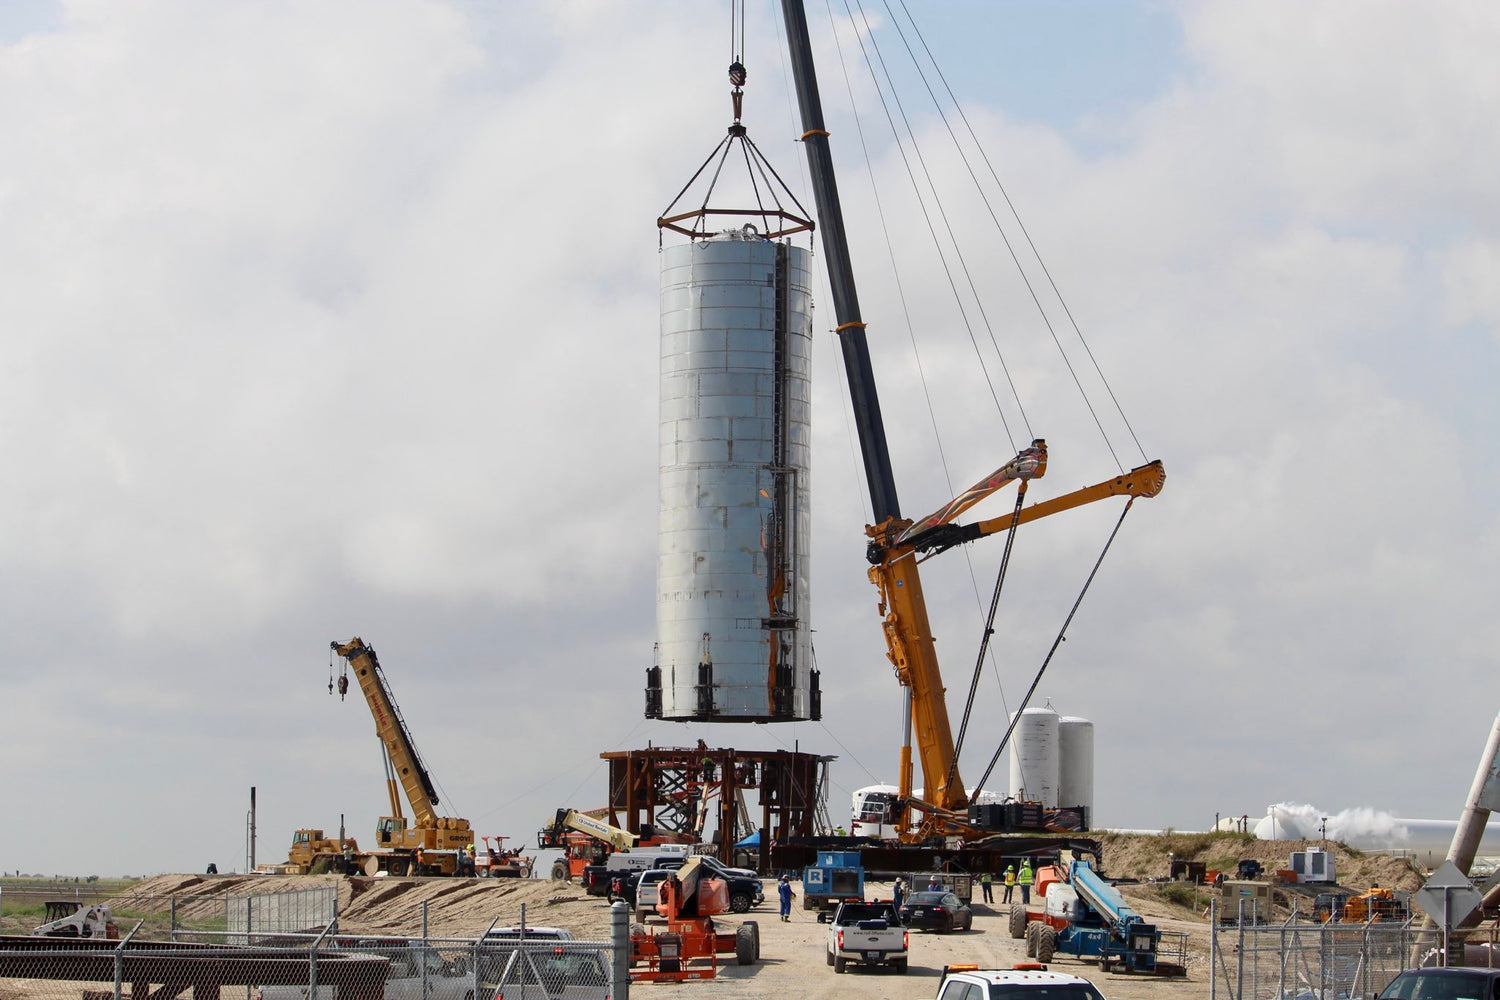 SpaceX Starship Mk1 moved to the launch pad in Texas